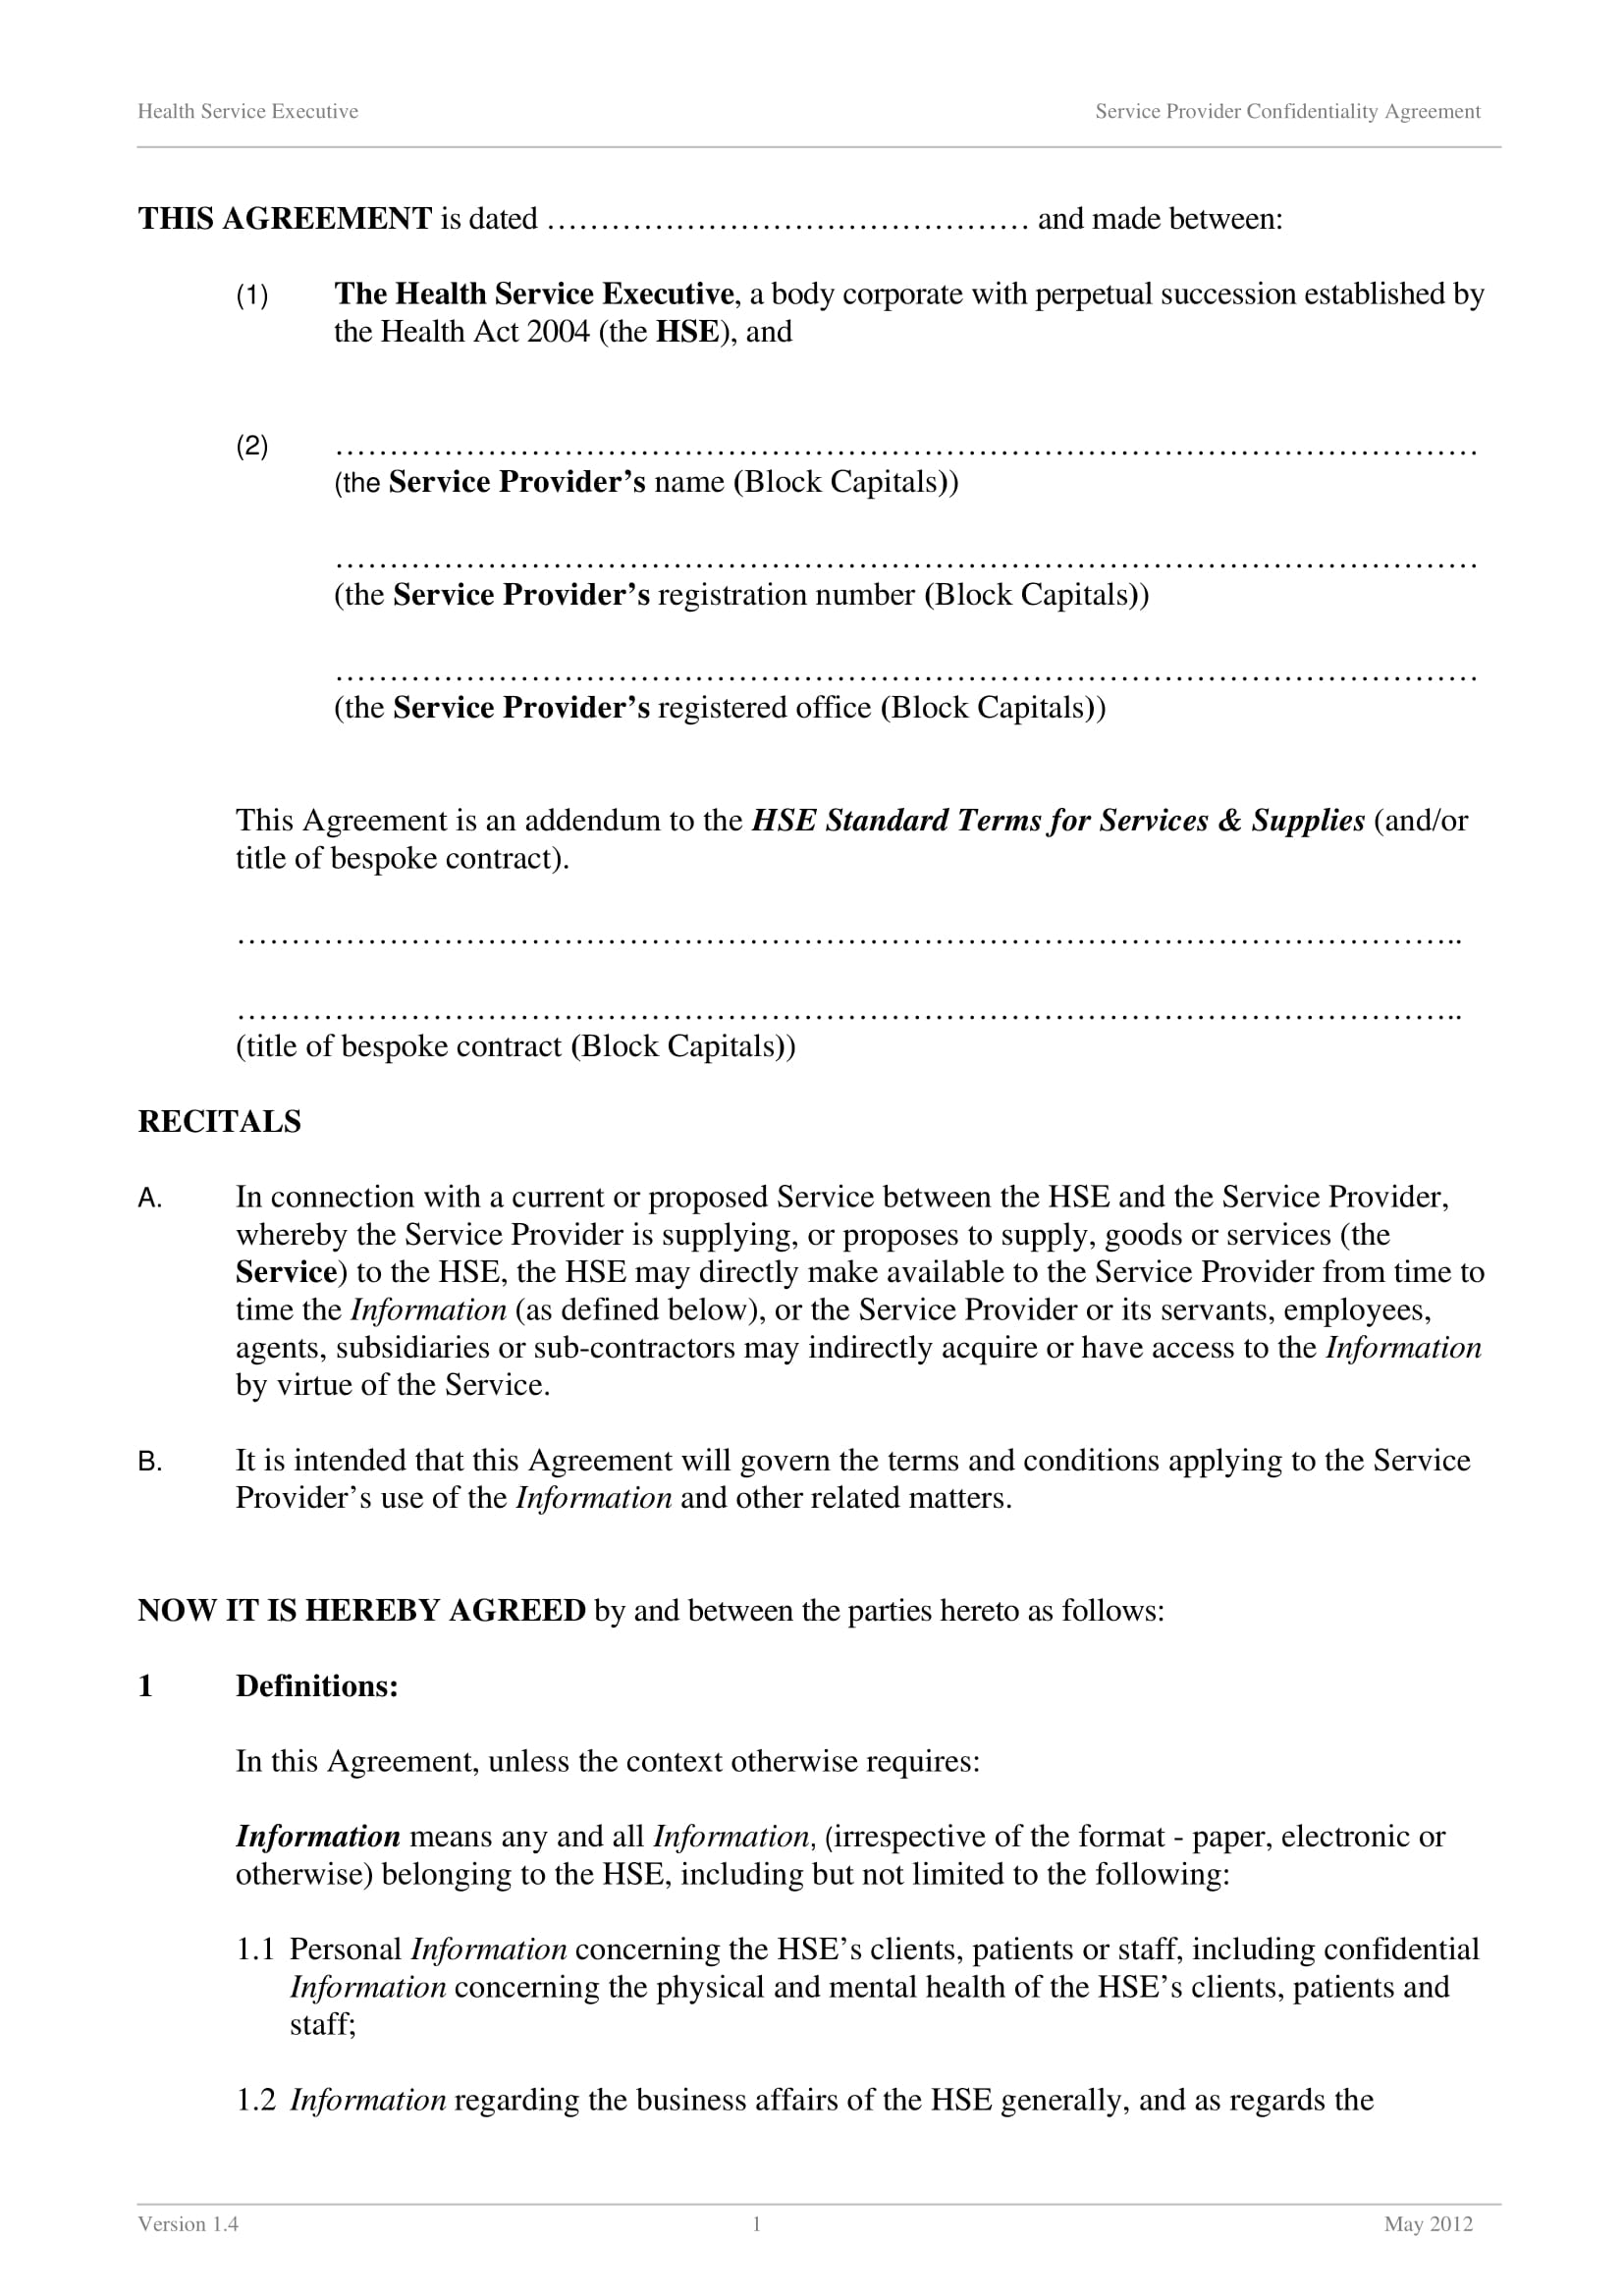 service provider confidentiality agreement form 2